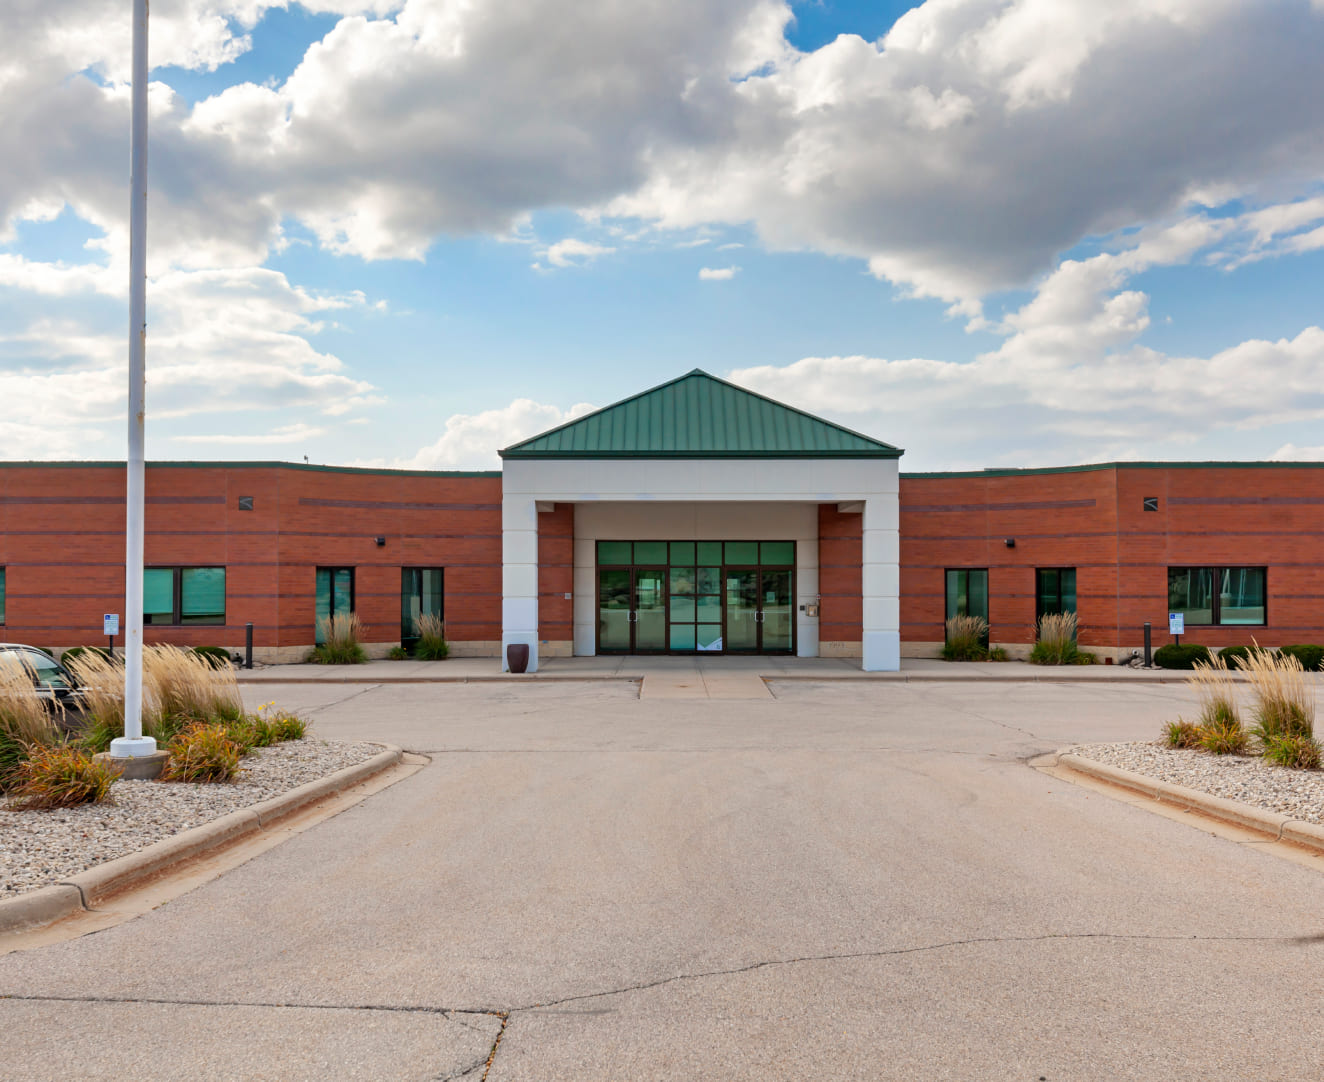 The front entrance of the one-story office building at 2601 Crossroads Drive in Madison, WI.